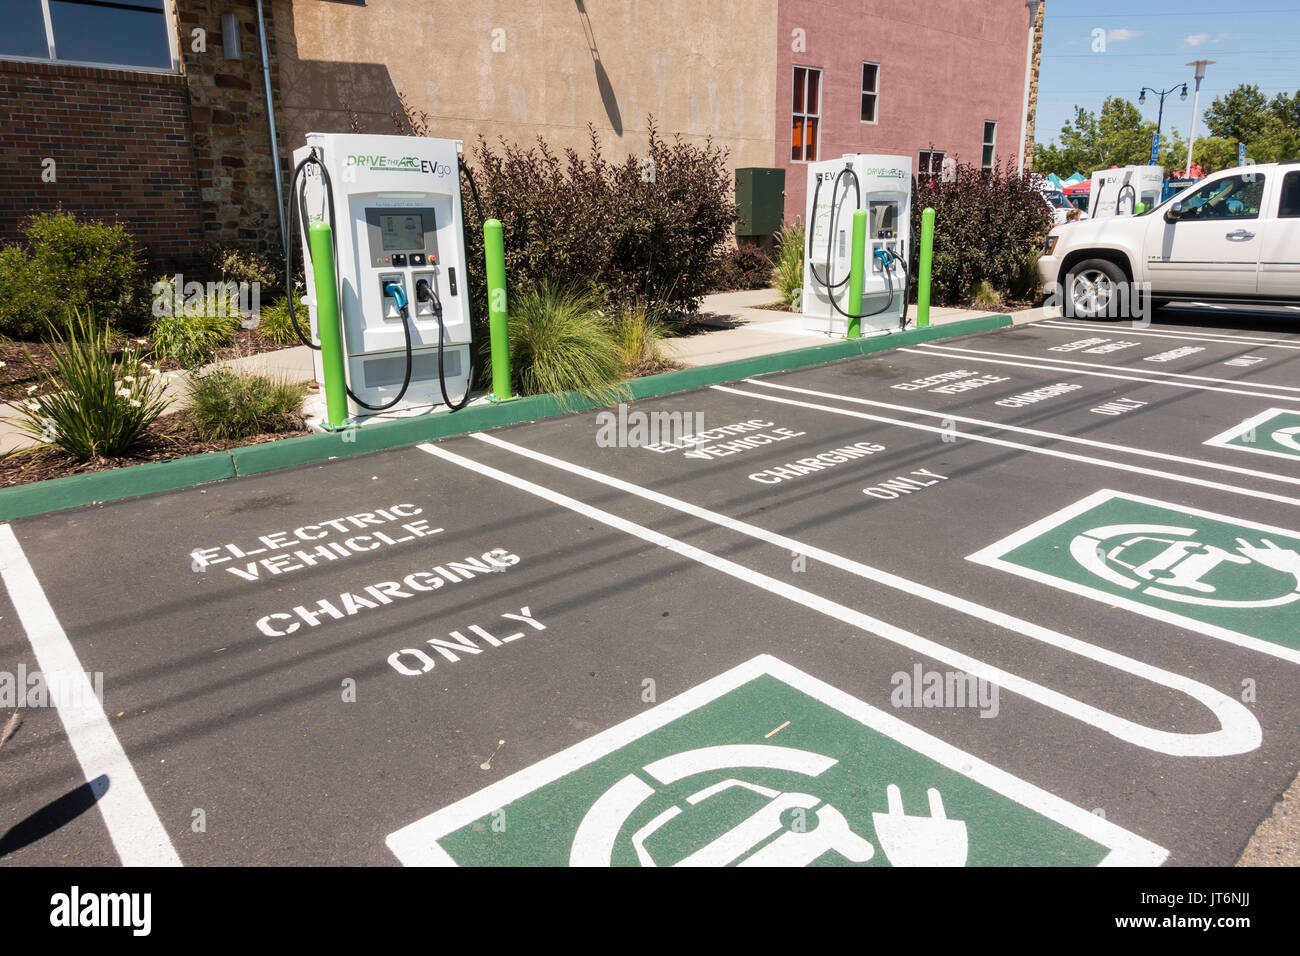 EV Electric Vehicle Charging Stations and parking spots at the front